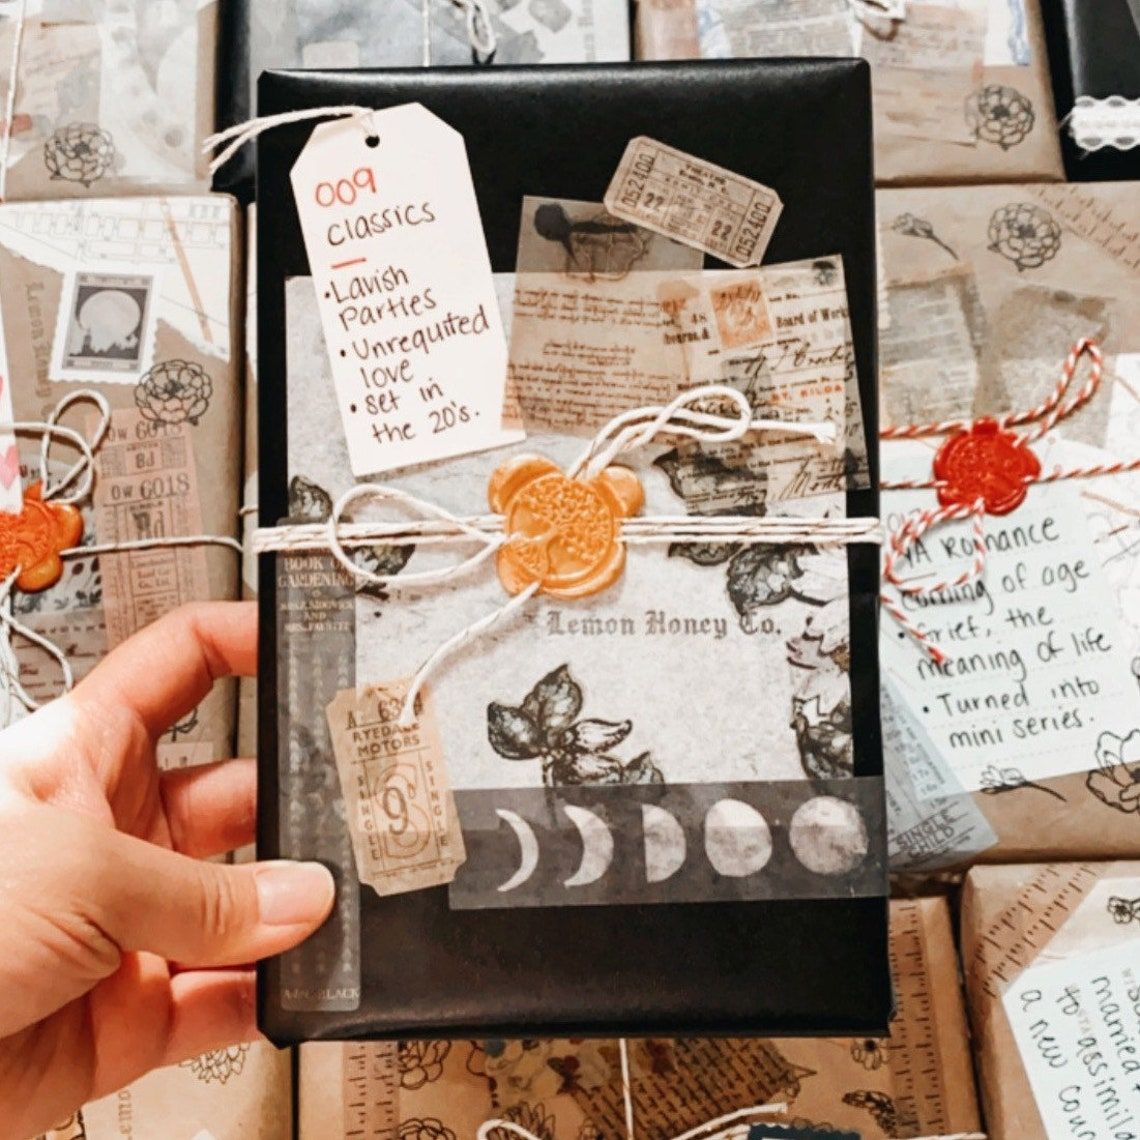 Blind date book with scrapbooked cover